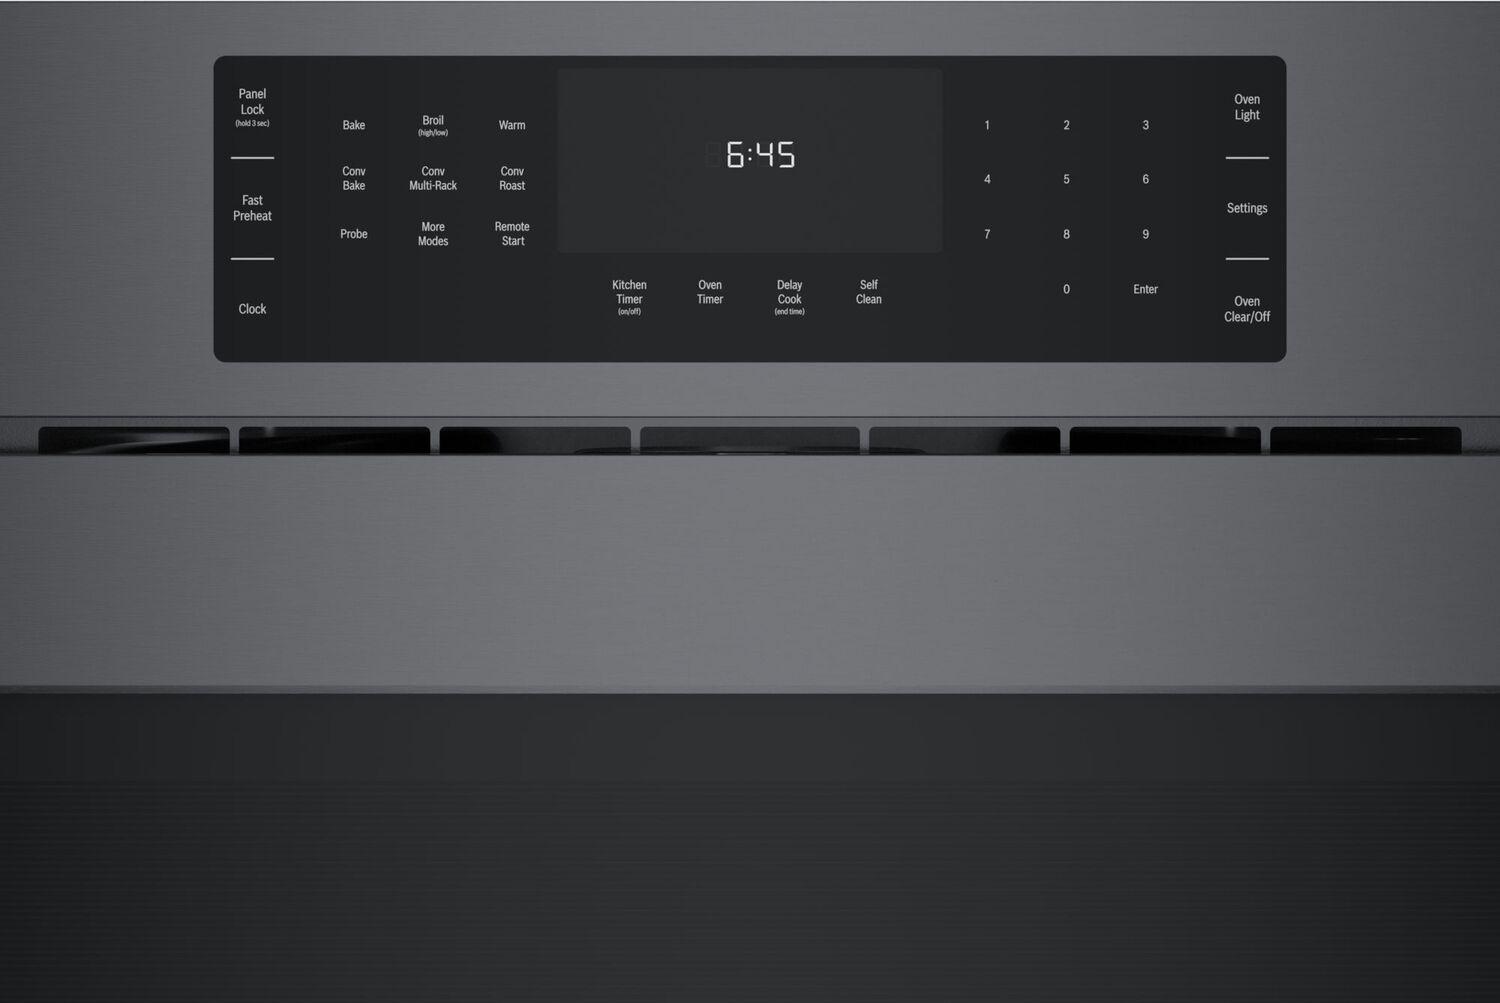 Bosch HBL8444RUC 800 Series Single Wall Oven 30'' Right Sideopening Door, Black Stainless Steel Hbl8444Ruc